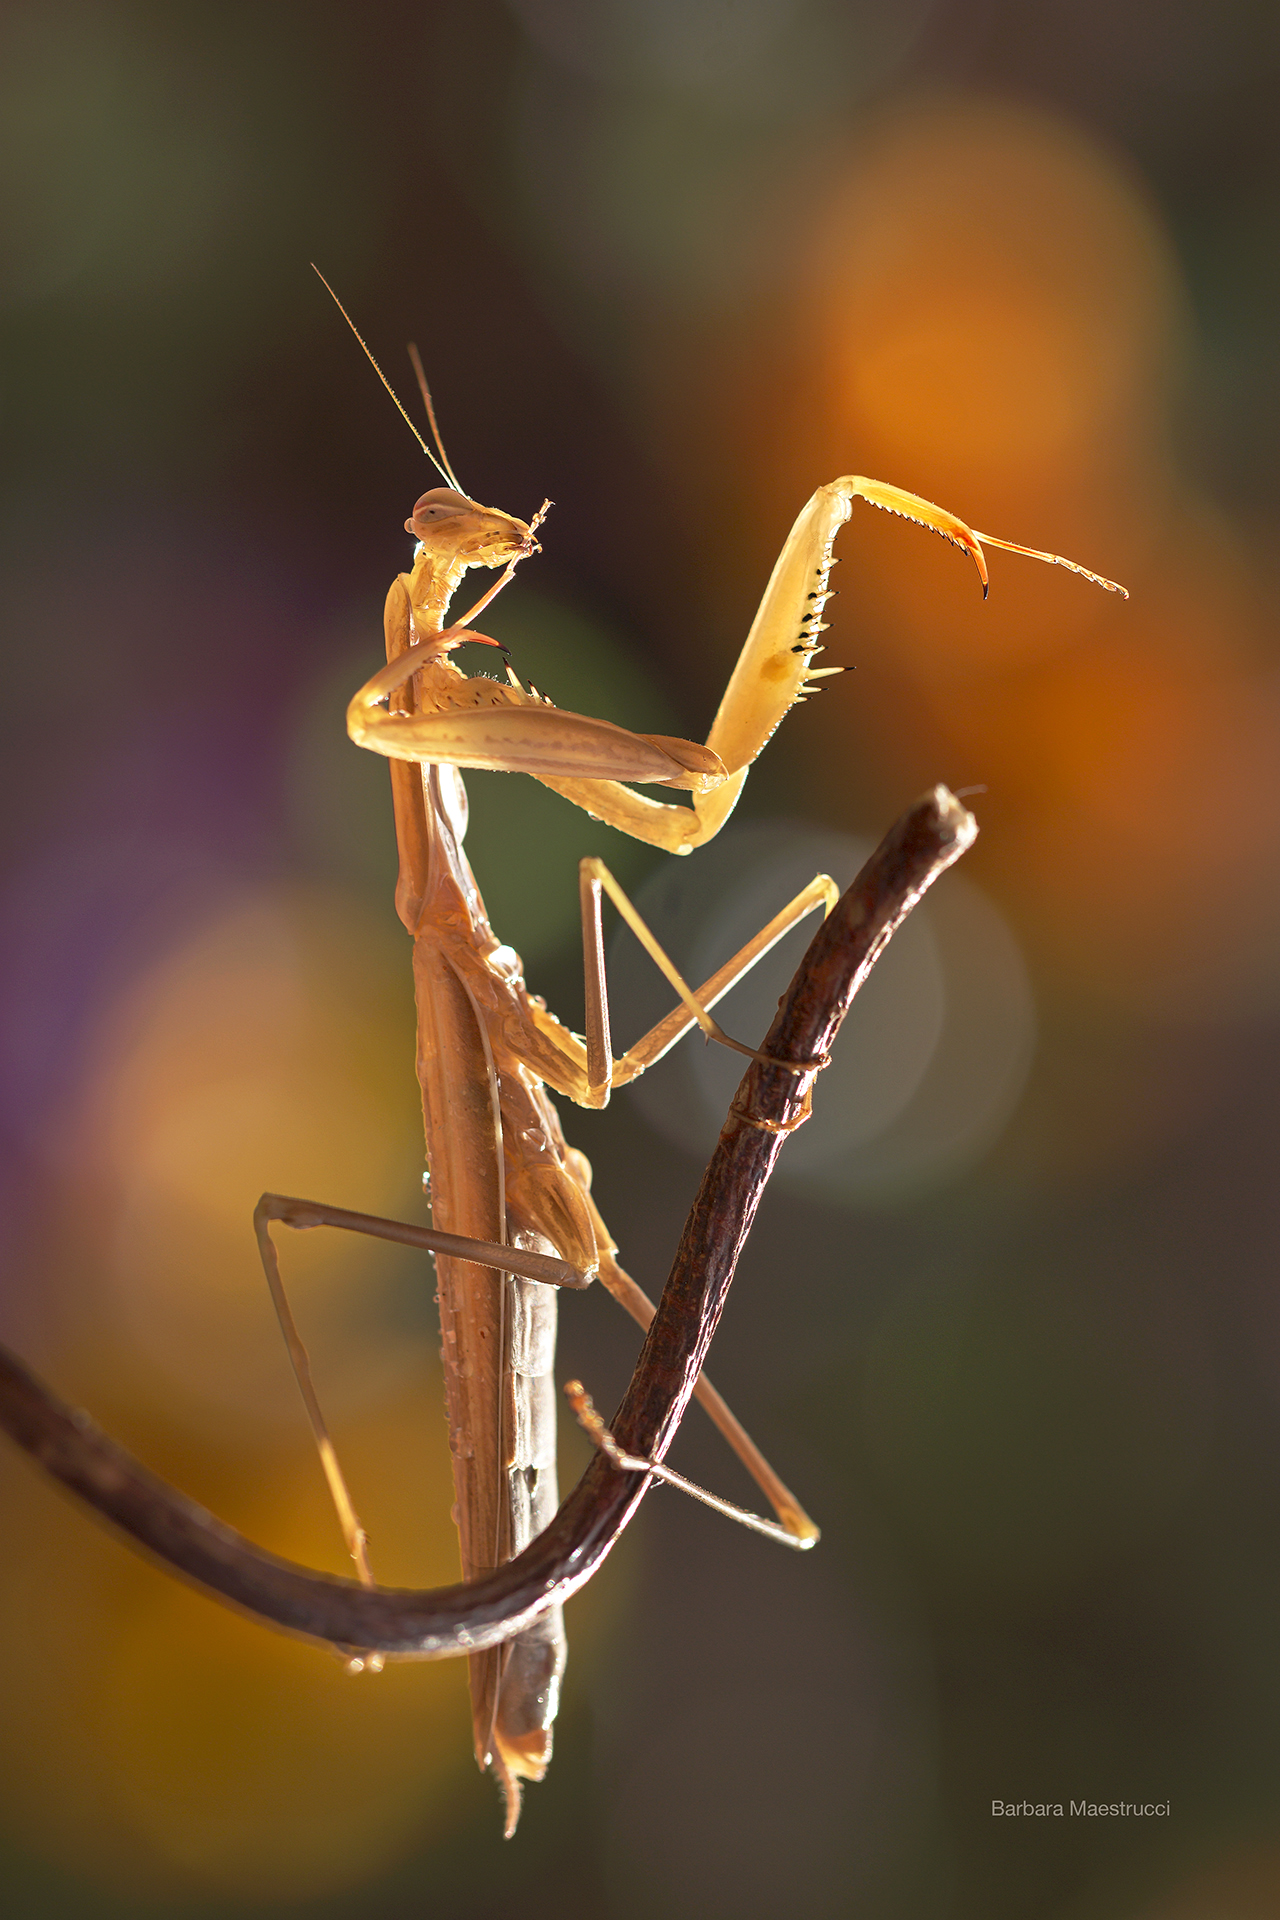 The dance of the Mantis...